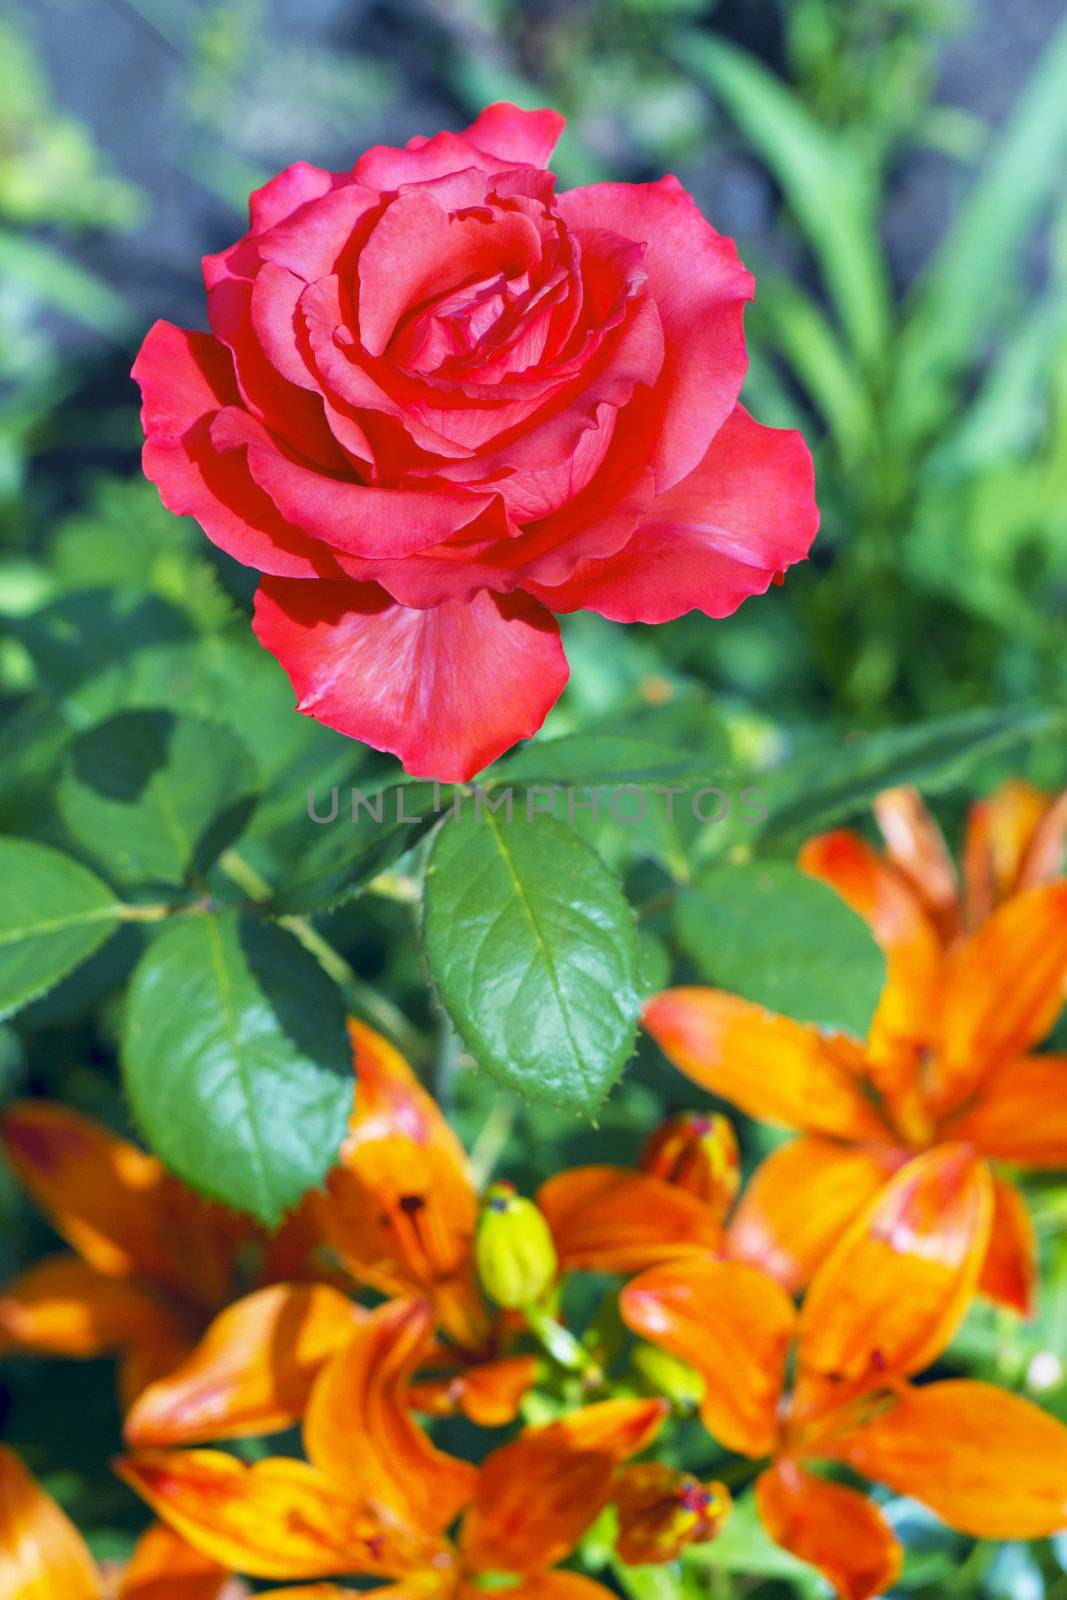 blooming red rose on a background of orange lilies by Plus69